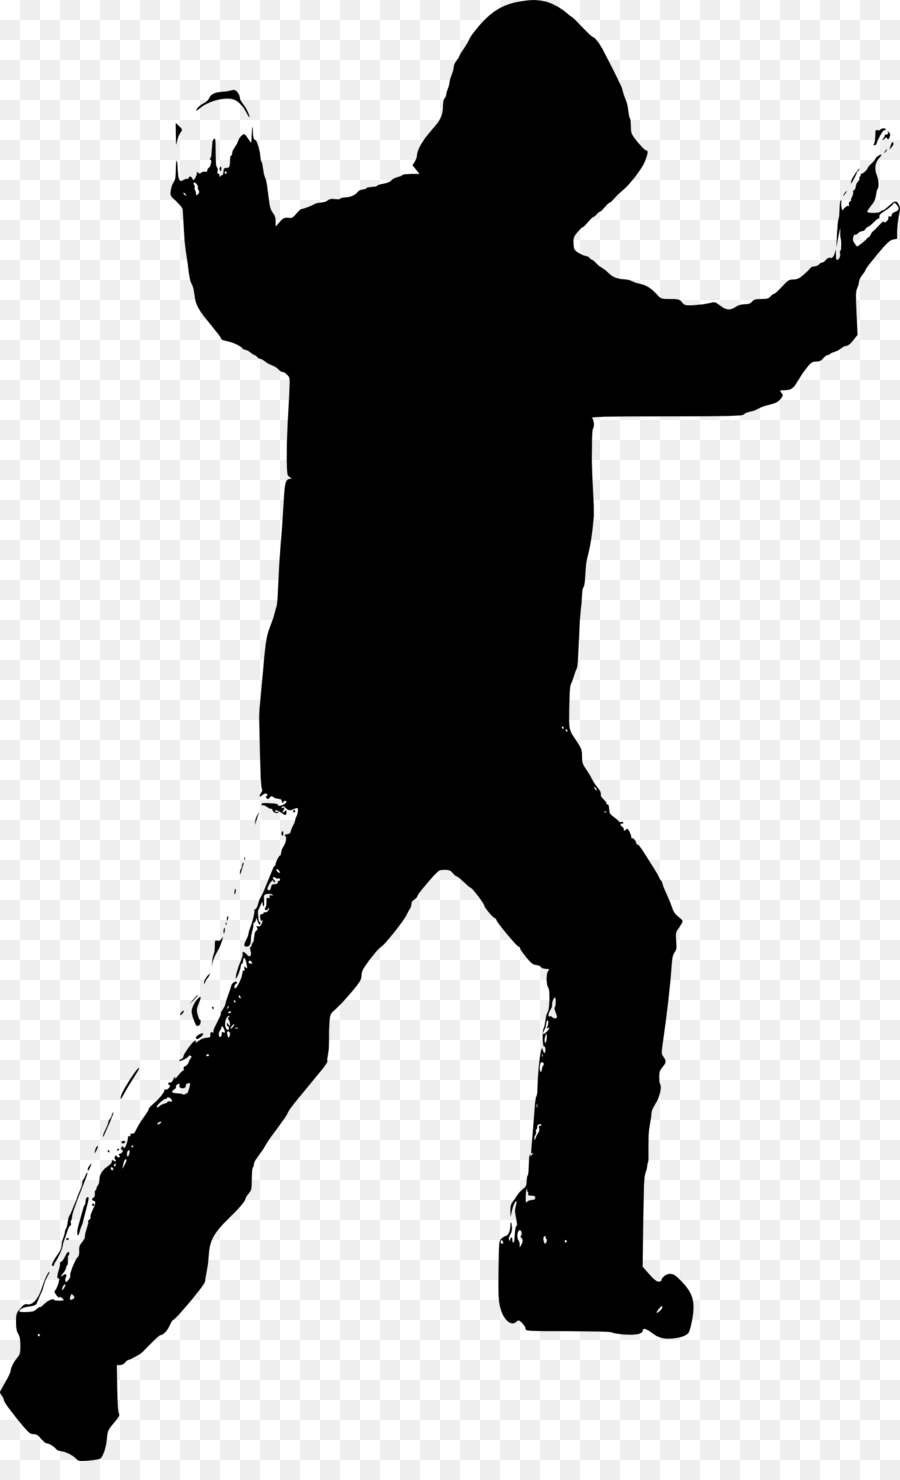 Silhouette Boxing Trivia Black and white - Silhouette png download - 1571*2551 - Free Transparent Silhouette png Download.